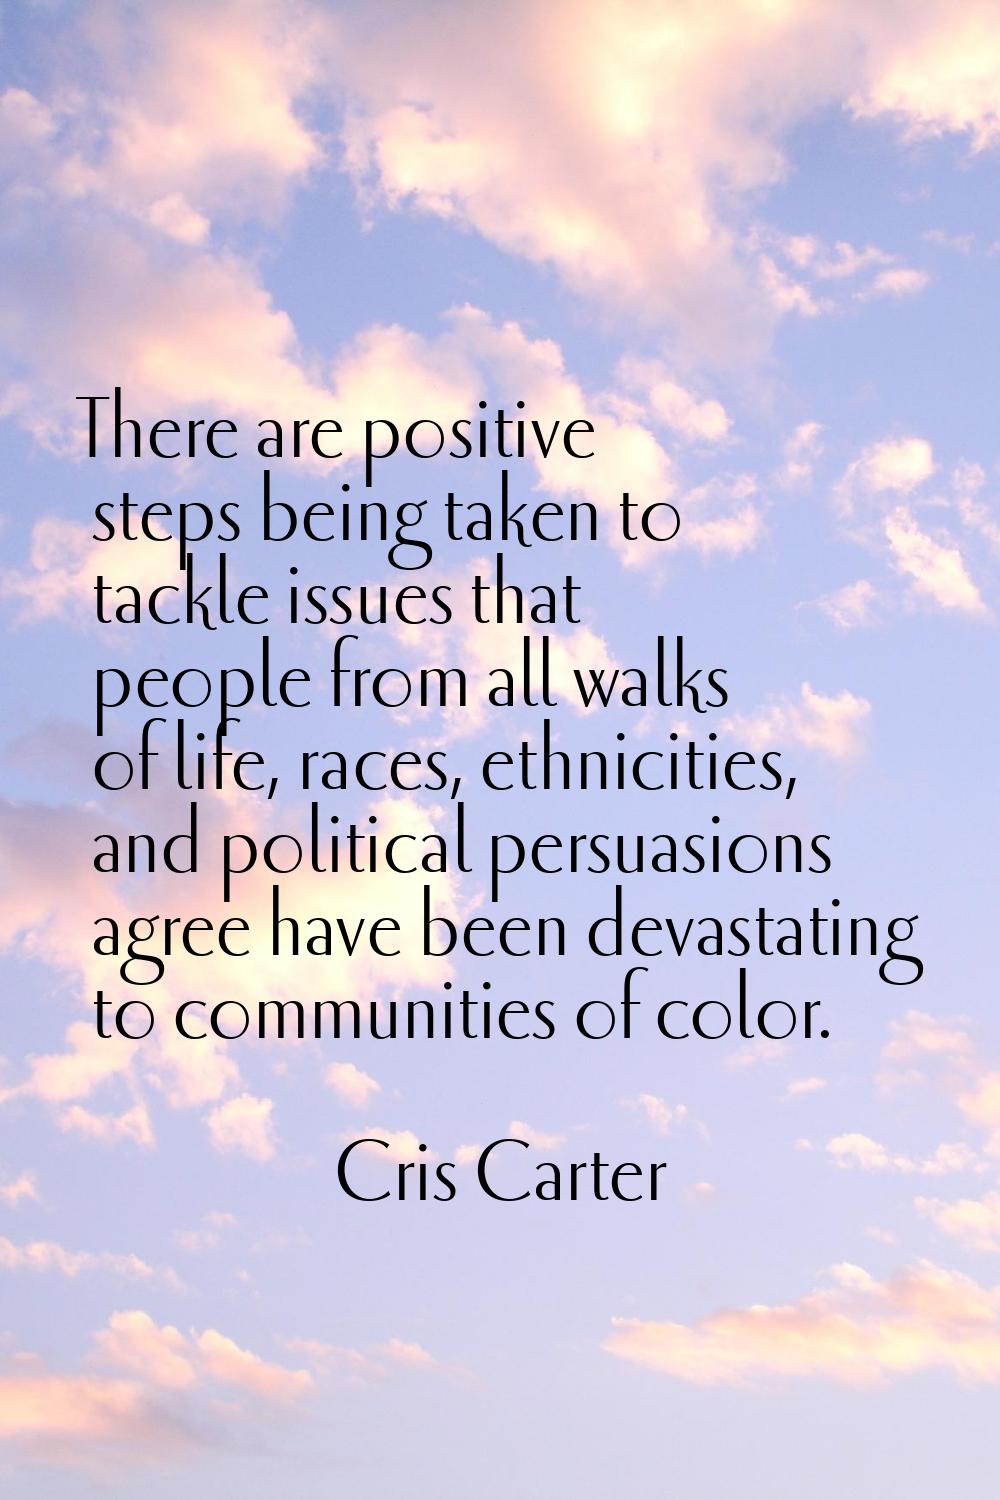 There are positive steps being taken to tackle issues that people from all walks of life, races, et